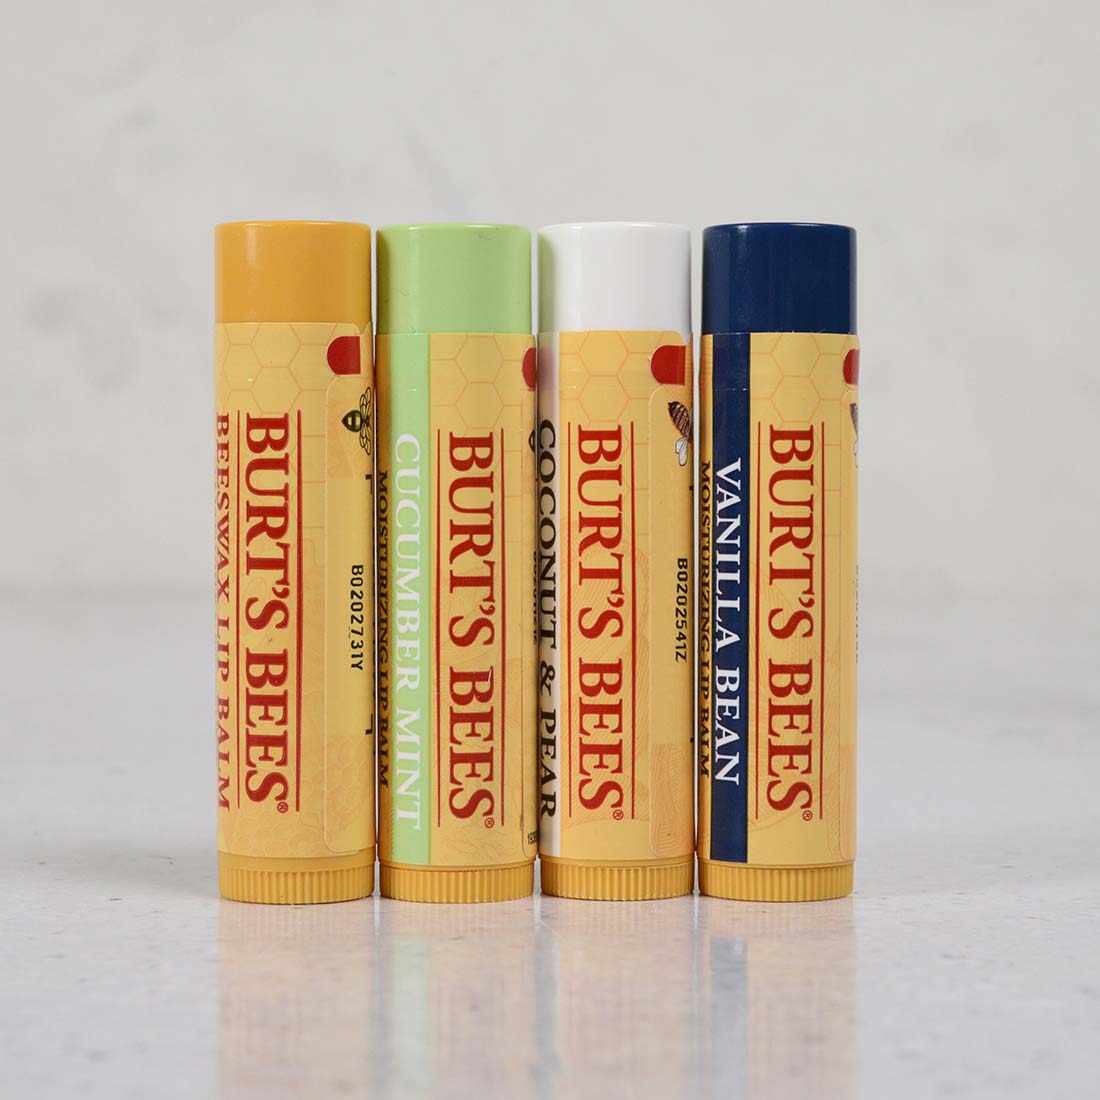 Buy Burt's Bees Lip Balm Valentines Day Gifts, Beeswax, Cucumber